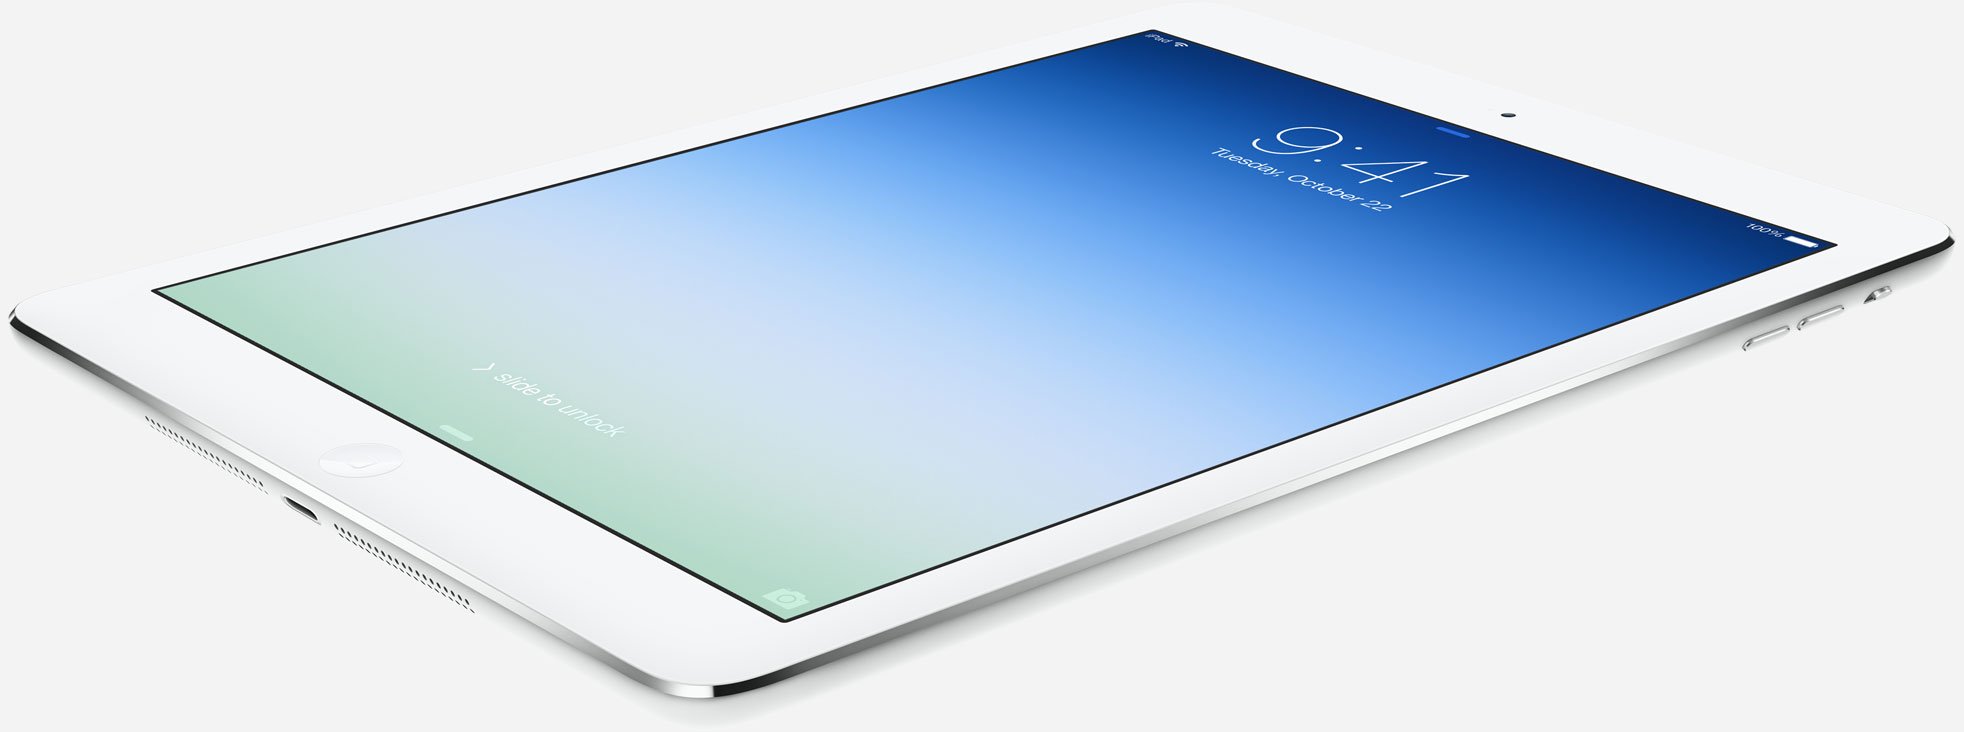 The iPad Air is new, but we could still see some Black Friday deals.